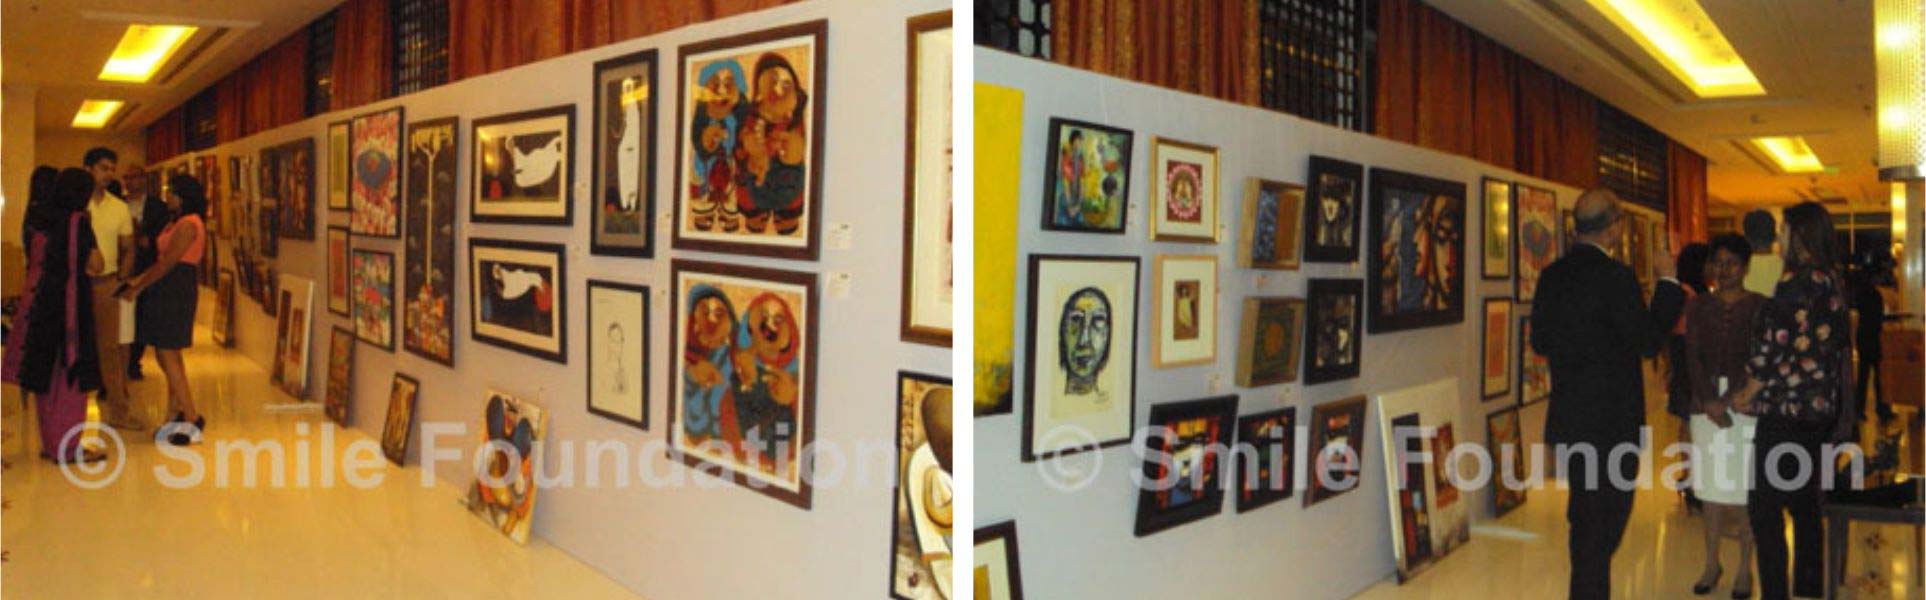 'Art and Smile' to empower Girl Children through education